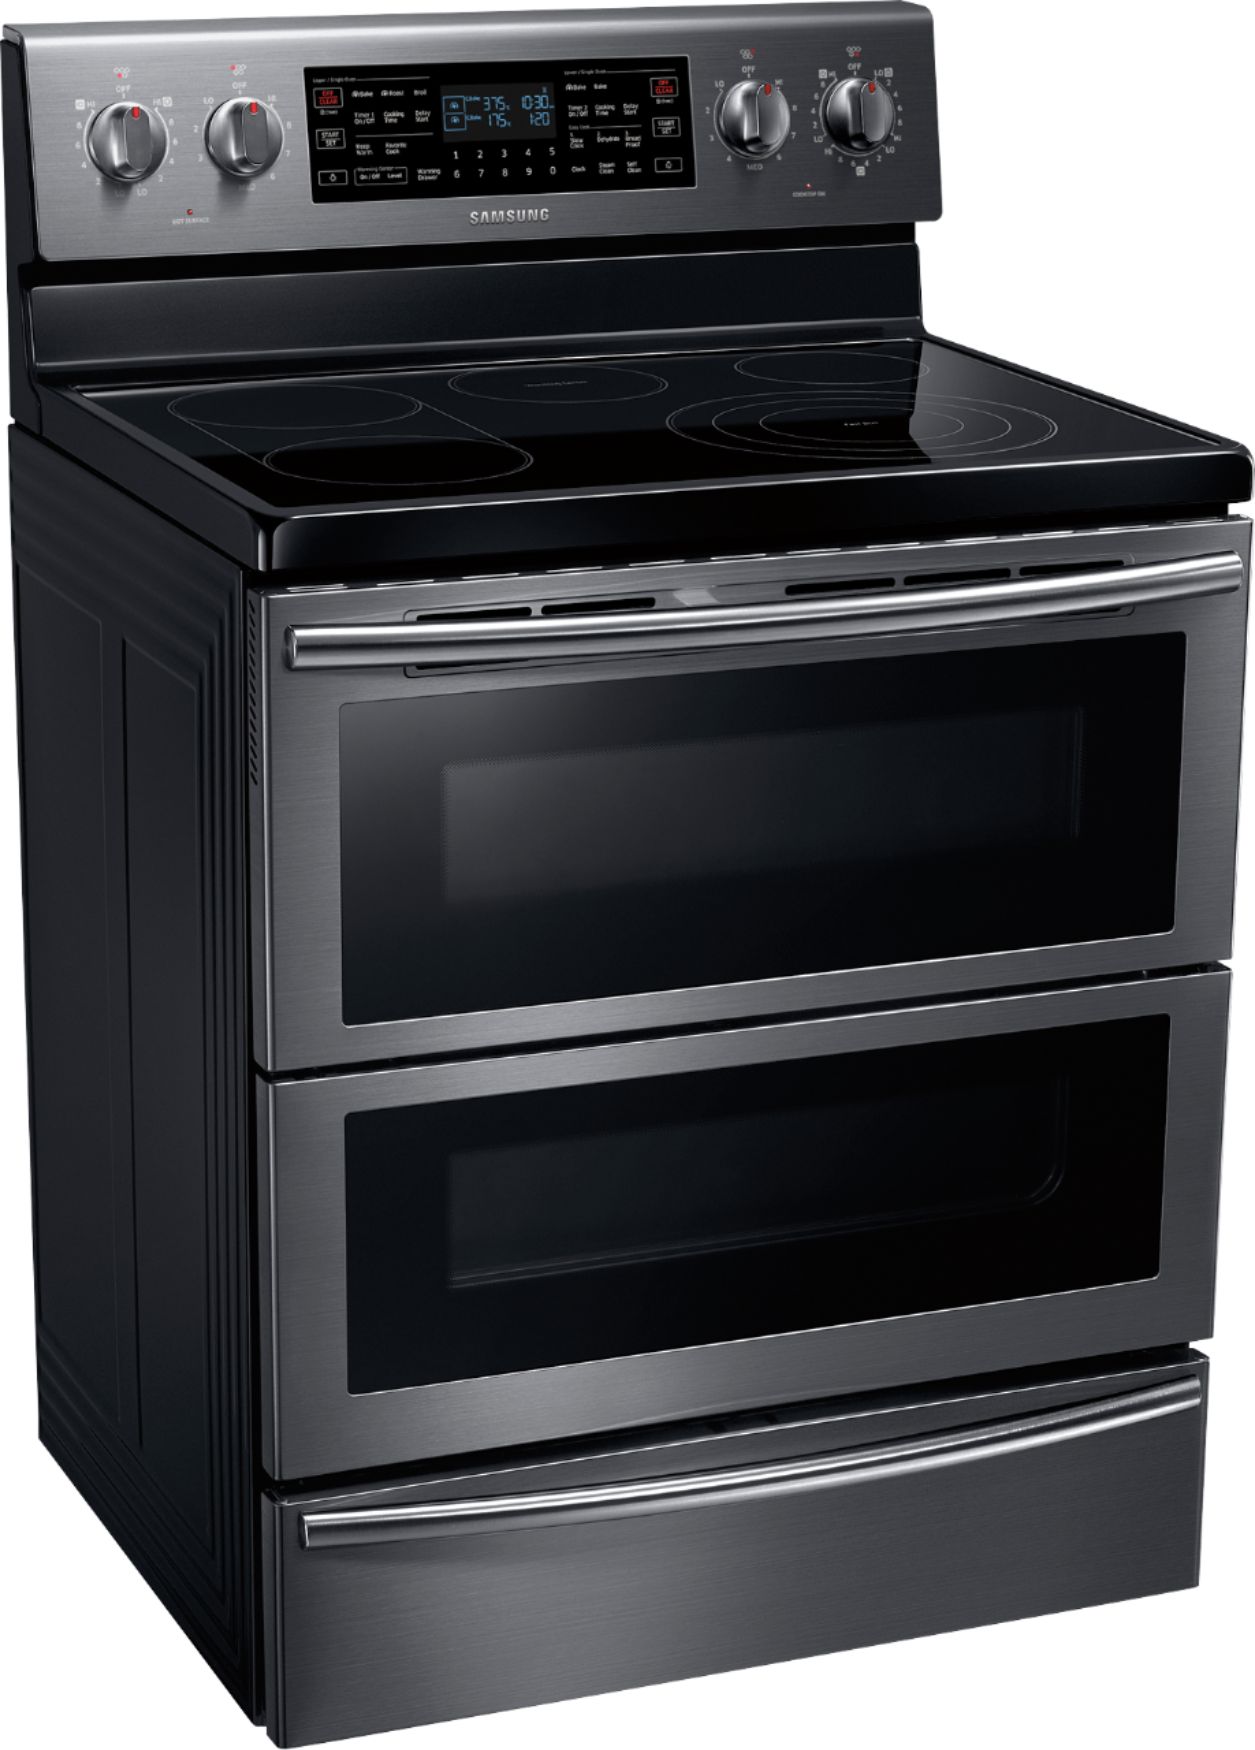 Angle View: Samsung - Flex Duo™ 5.9 Cu. Ft. Self-Cleaning Freestanding Fingerprint Resistant Double Oven Electric Convection Range - Black Stainless Steel